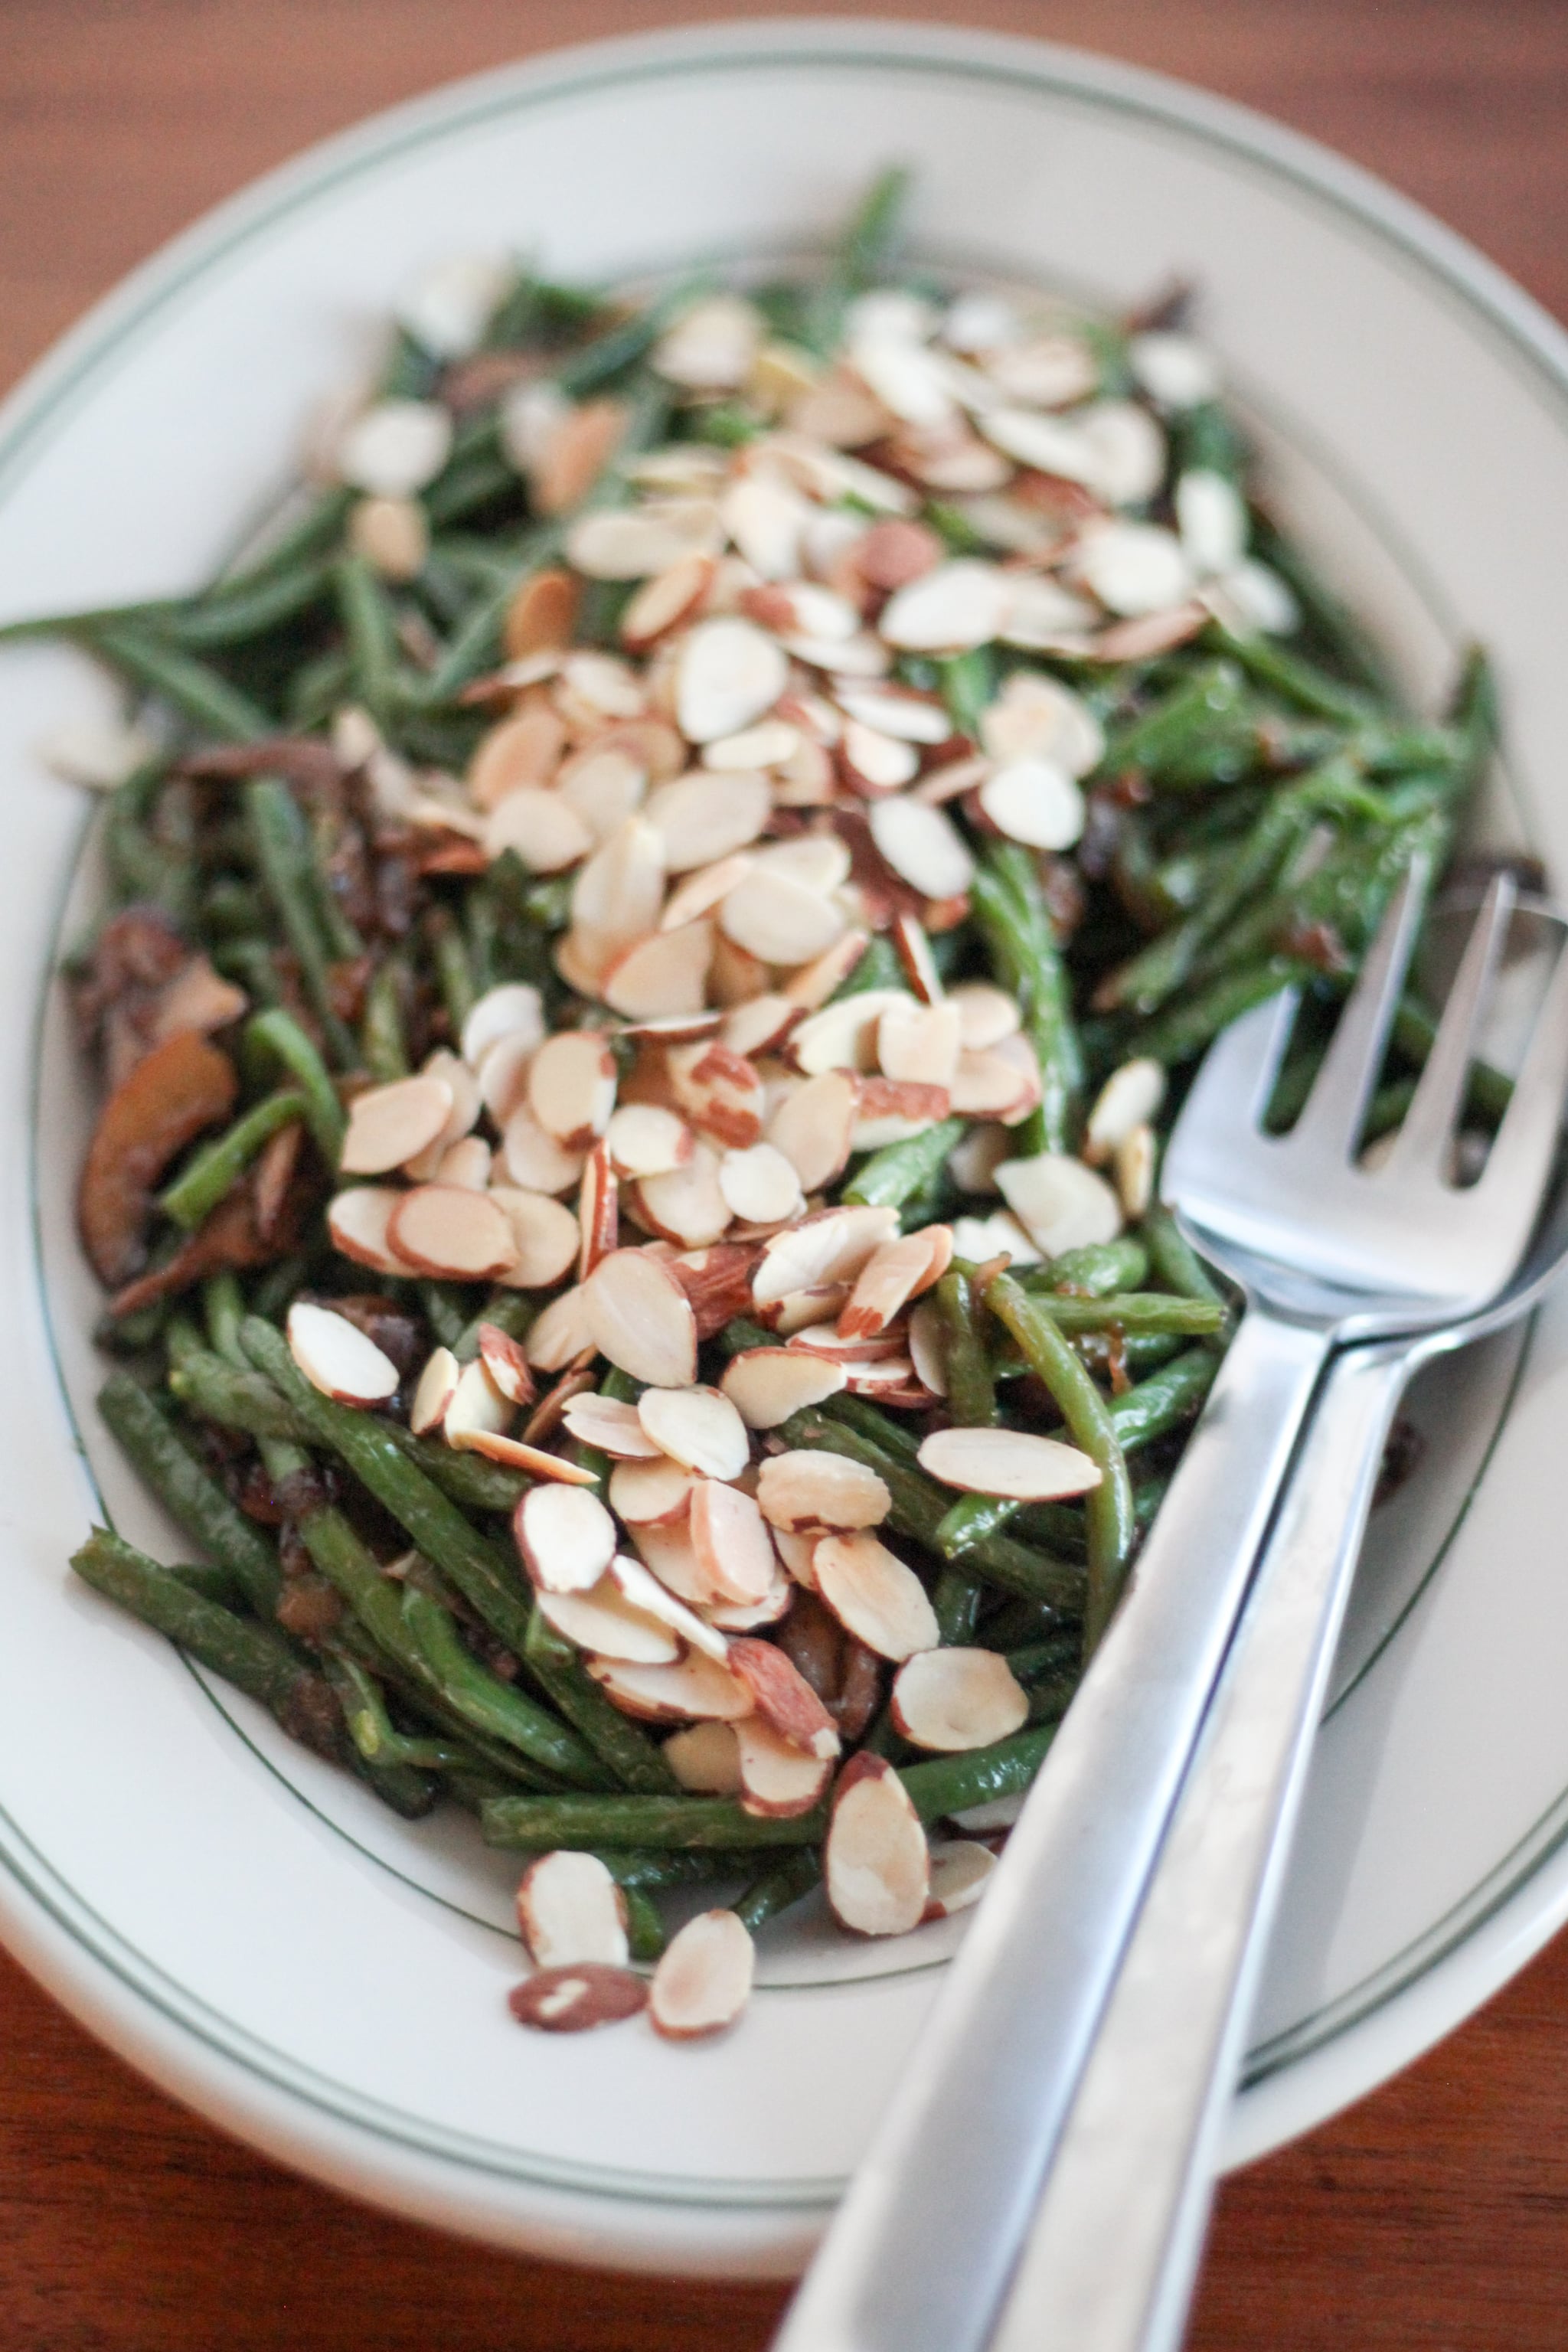 Blistered Green Beans With Mushrooms and Caramelized Onions | POPSUGAR Food